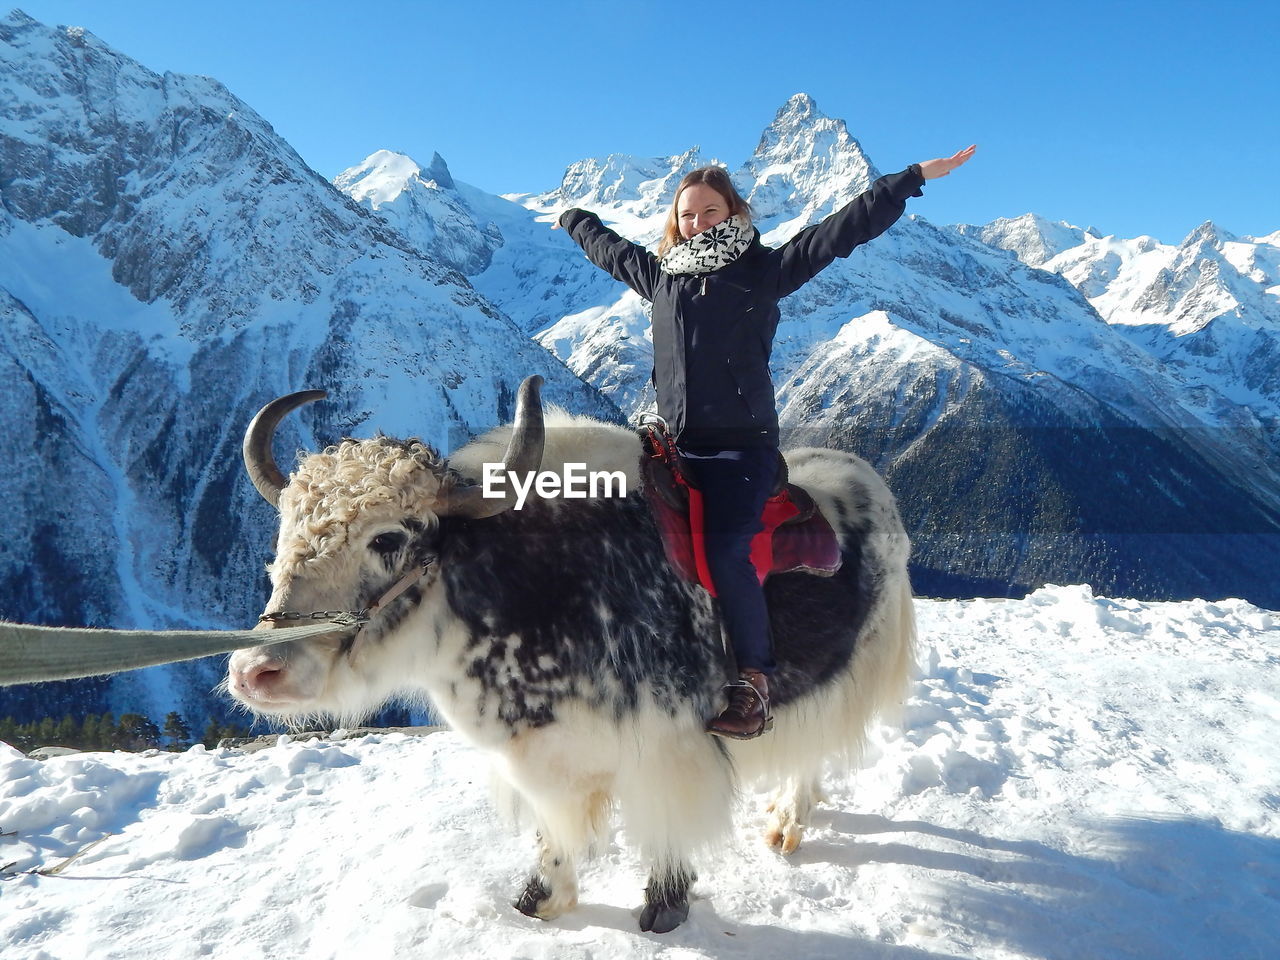 Smiling woman sitting on buffalo against snowcapped mountains